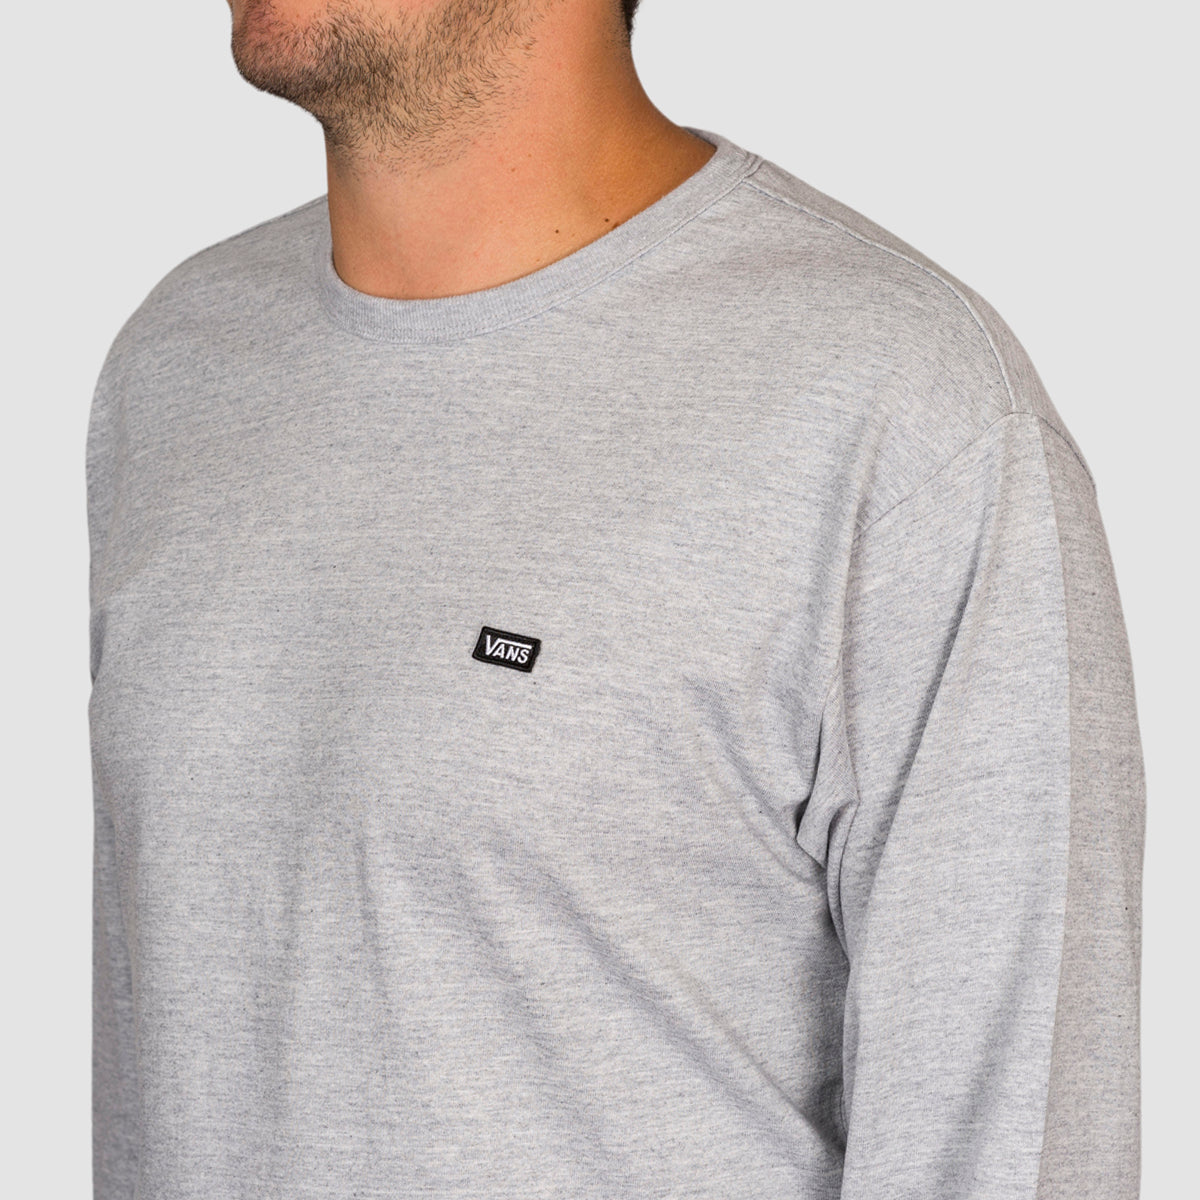 Vans Off The Wall Classic Longsleeve T-Shirt Athletic Heather